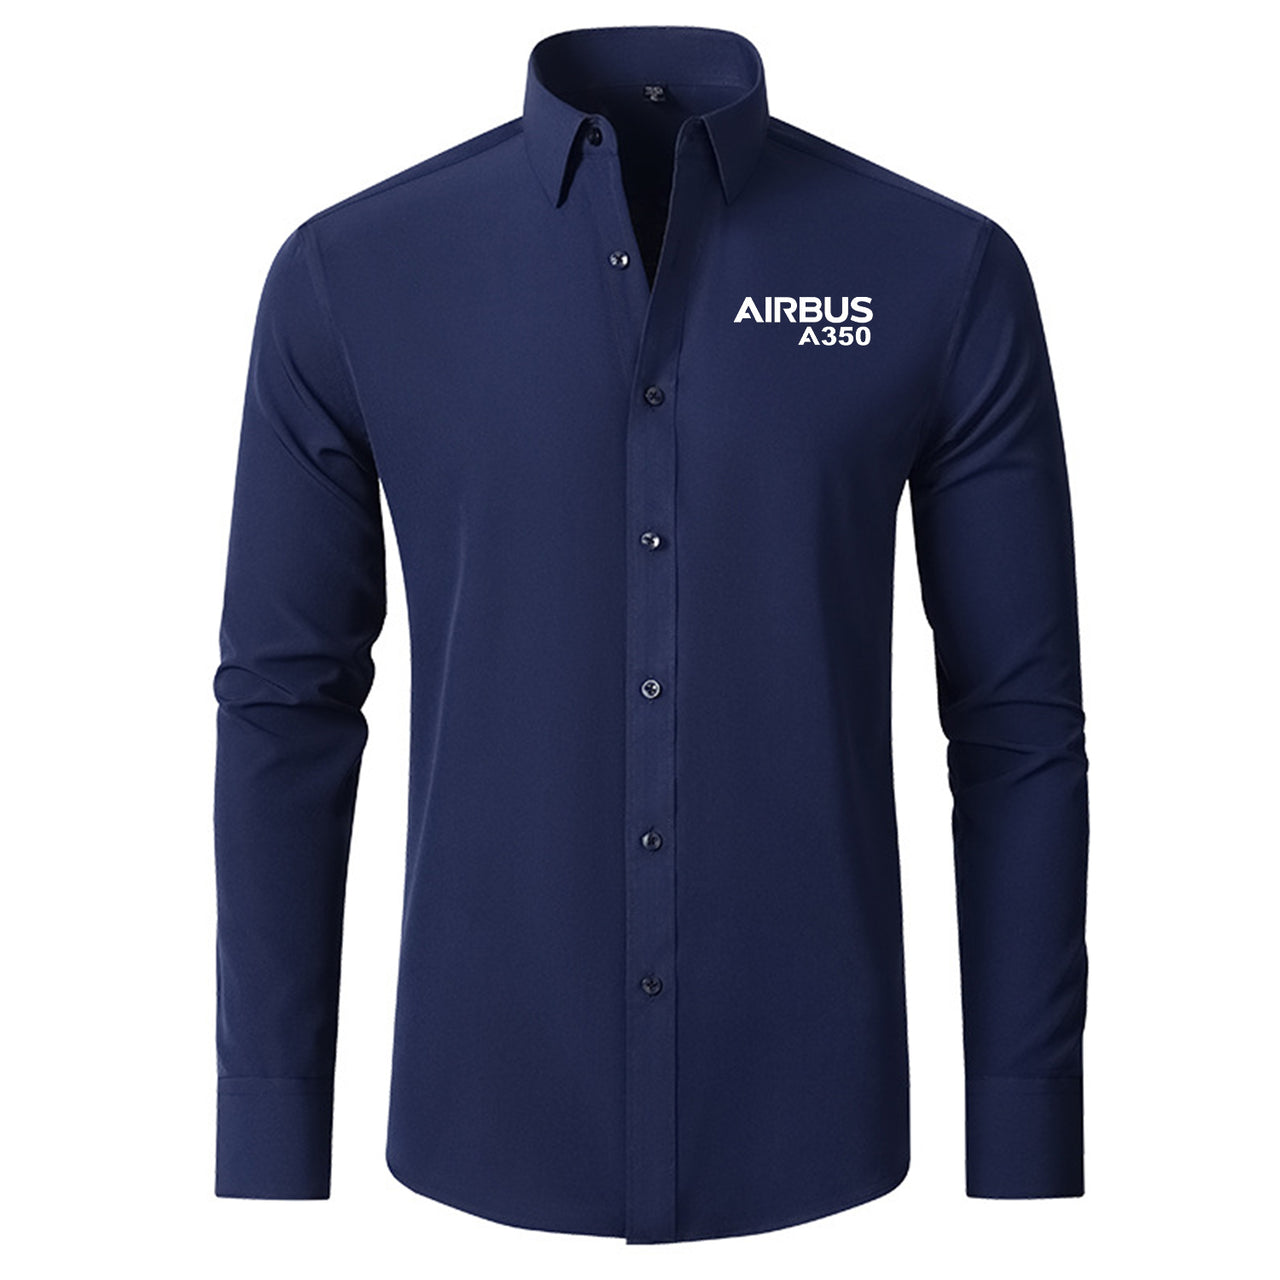 Airbus A350 & Text Designed Long Sleeve Shirts